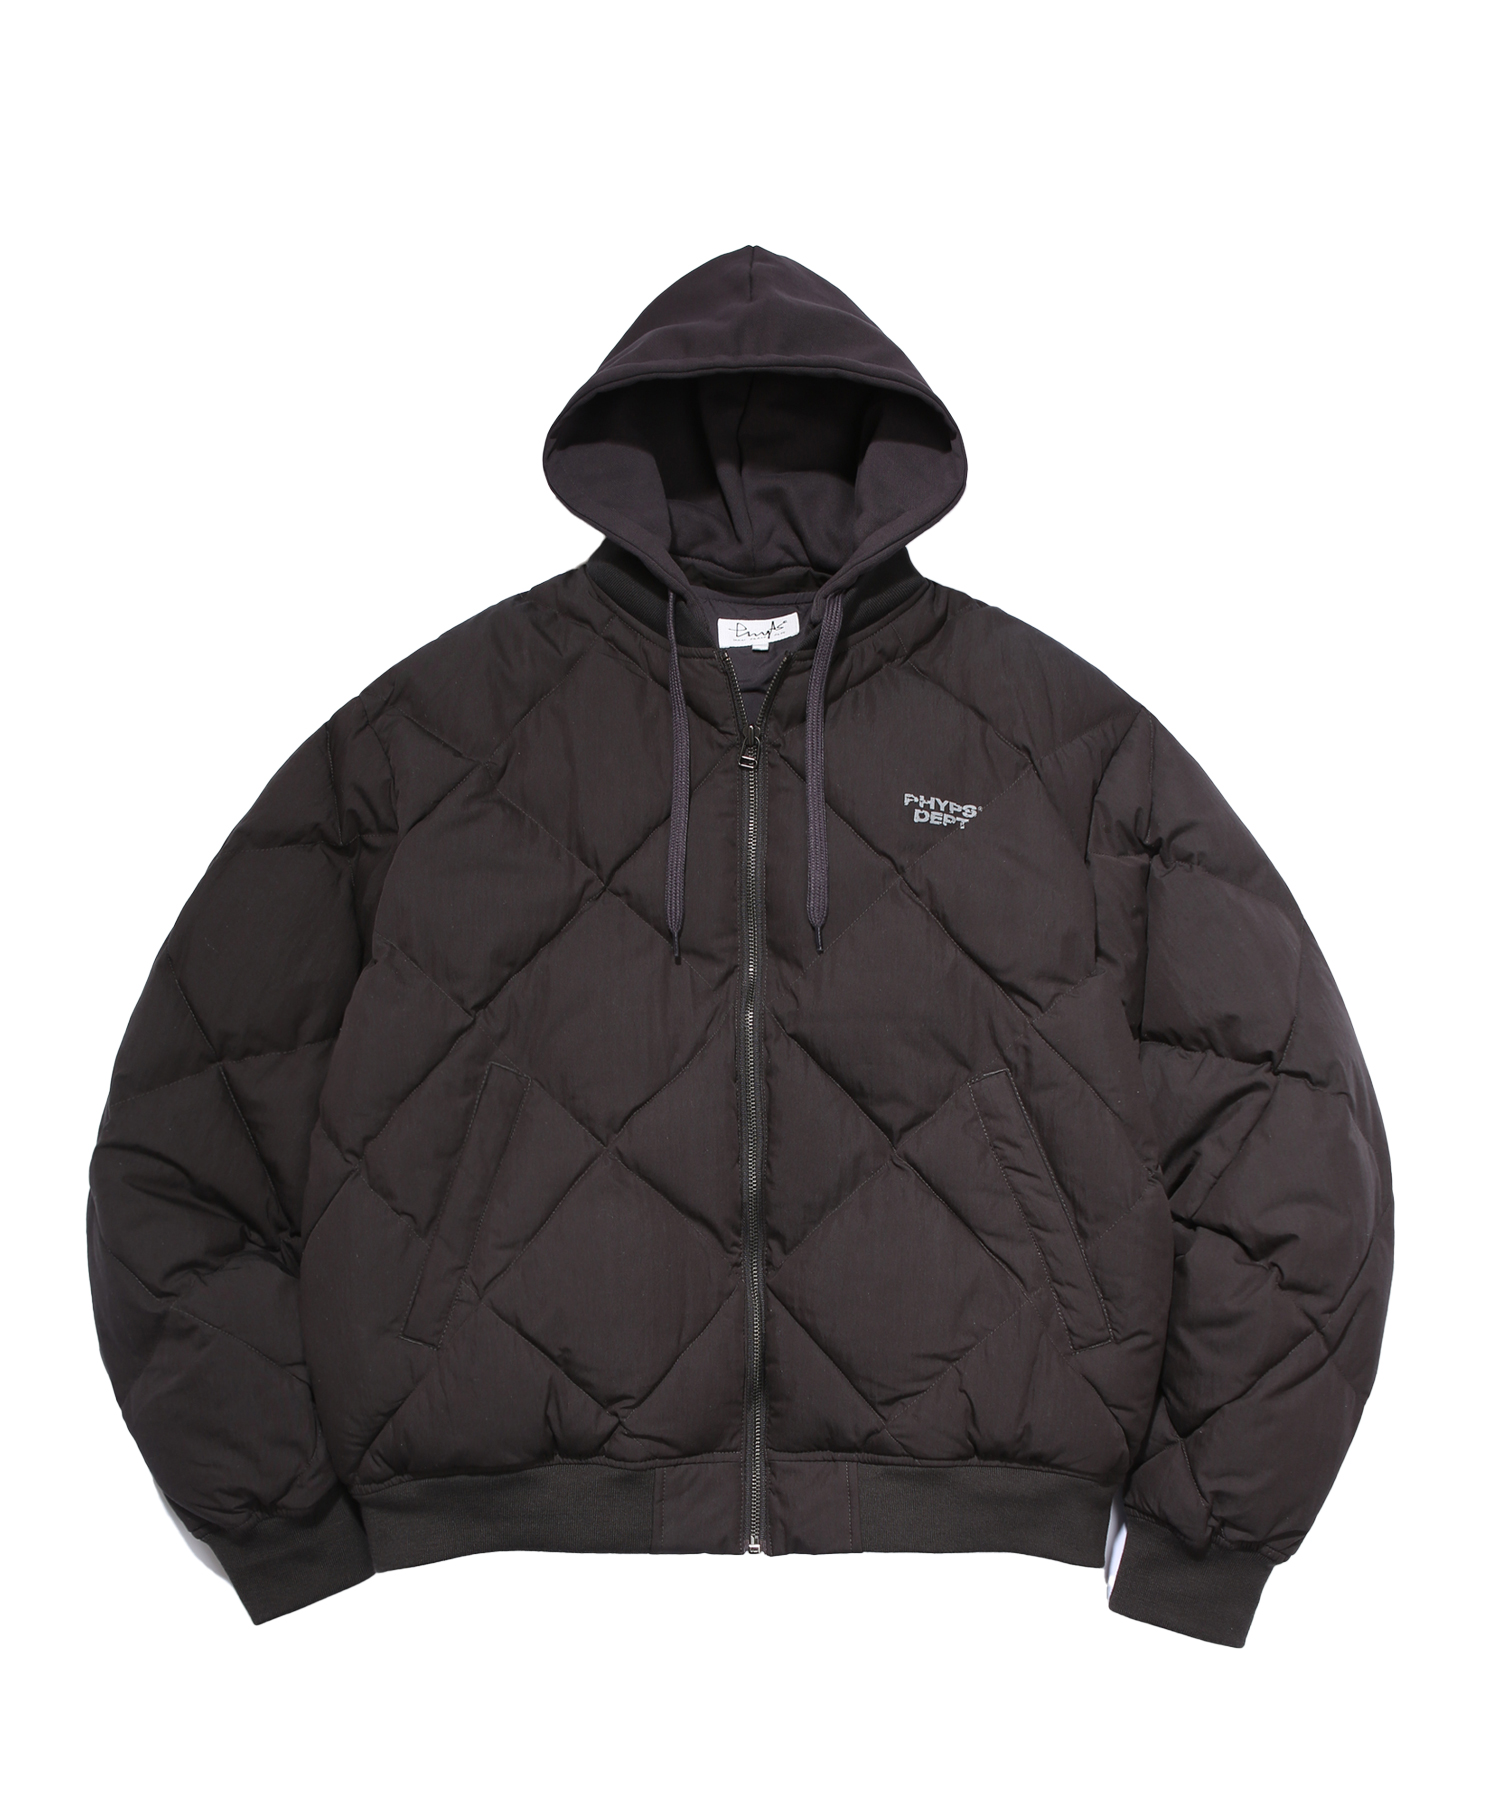 PHYPS® 2WAY HOODED QUILTING MA-1 JACKET CHARCOAL